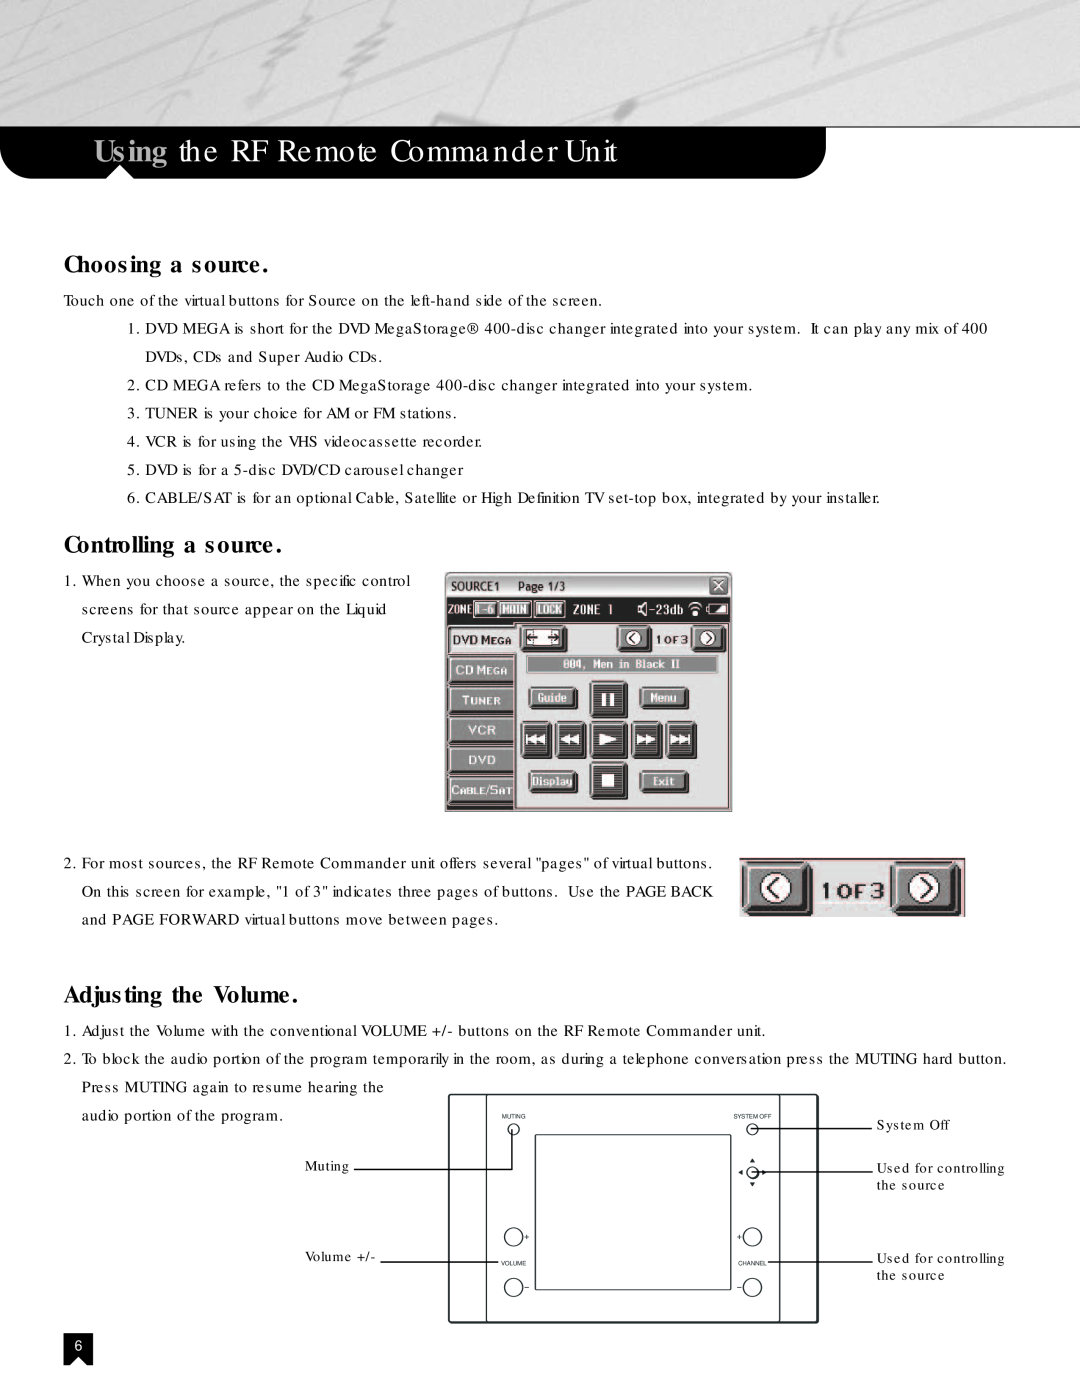 Sony NHS-2000 manual Choosing a source, Controlling a source, Adjusting the Volume, Using the RF Remote Commander Unit 